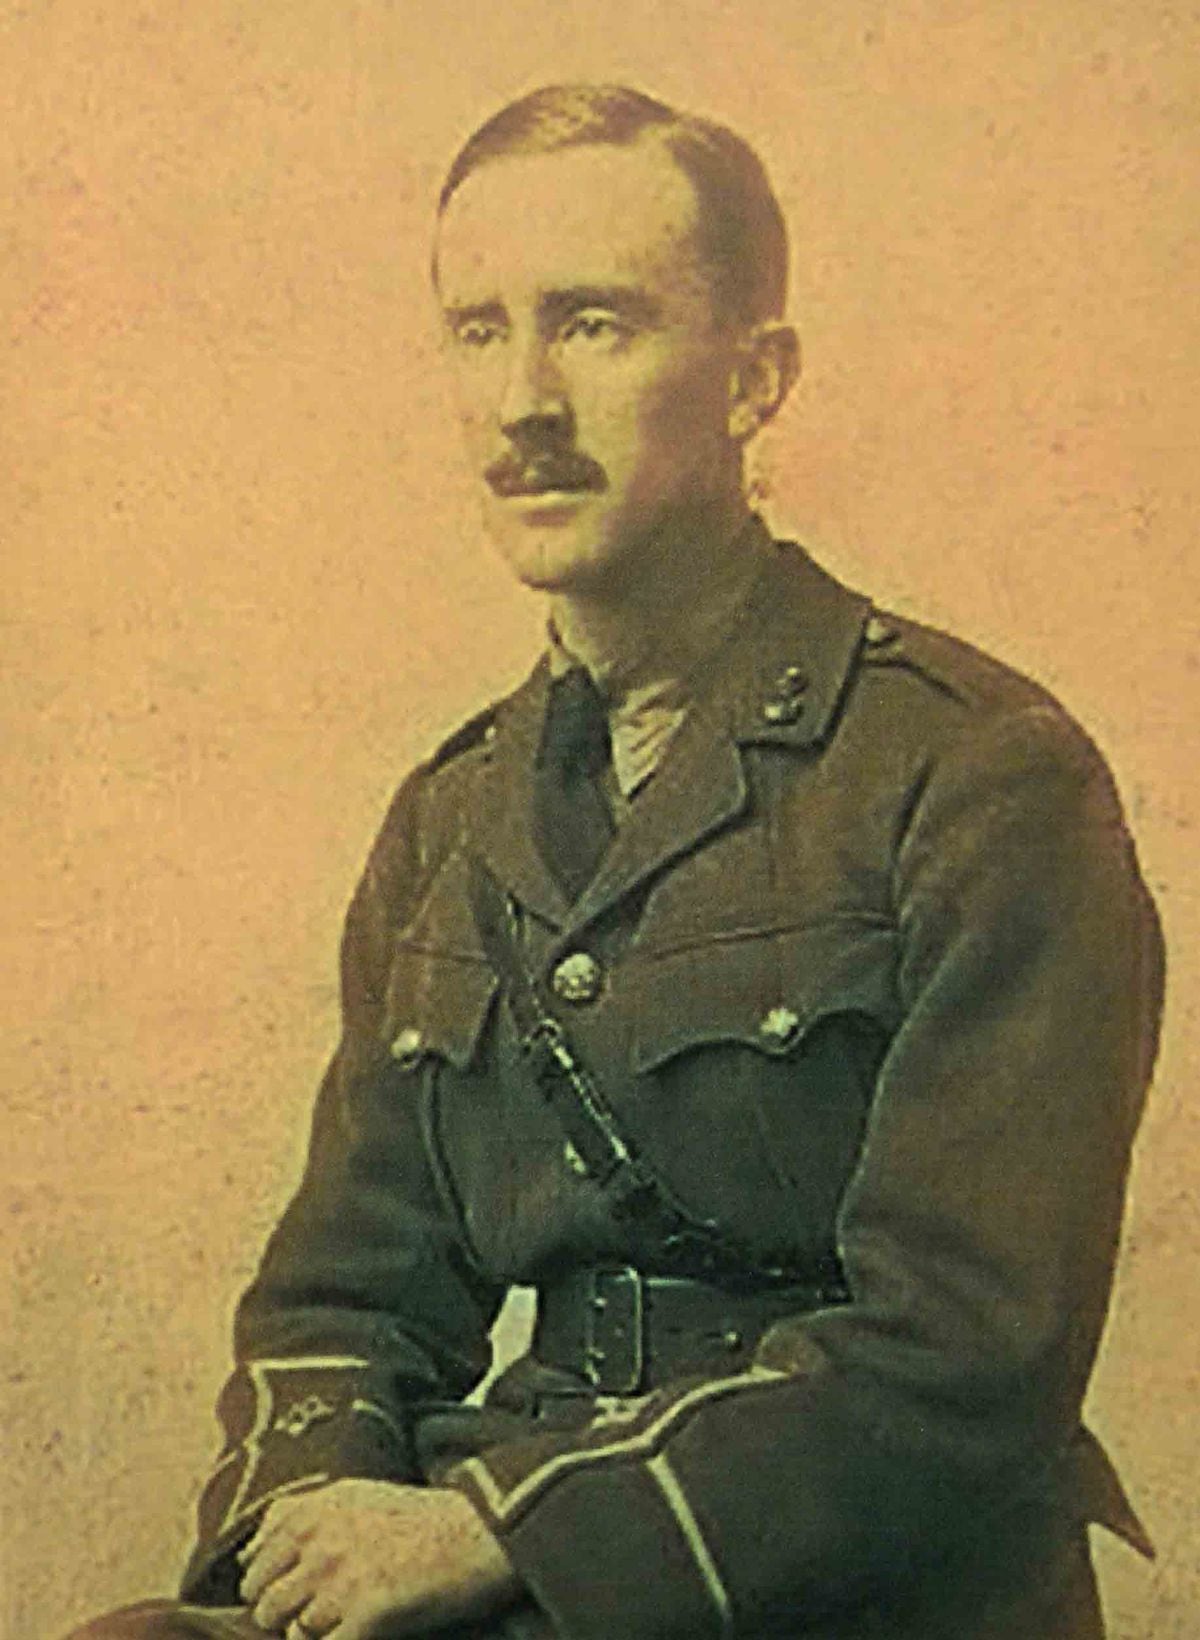 J.R.R. Tolkien was based in Staffordshire during WW1